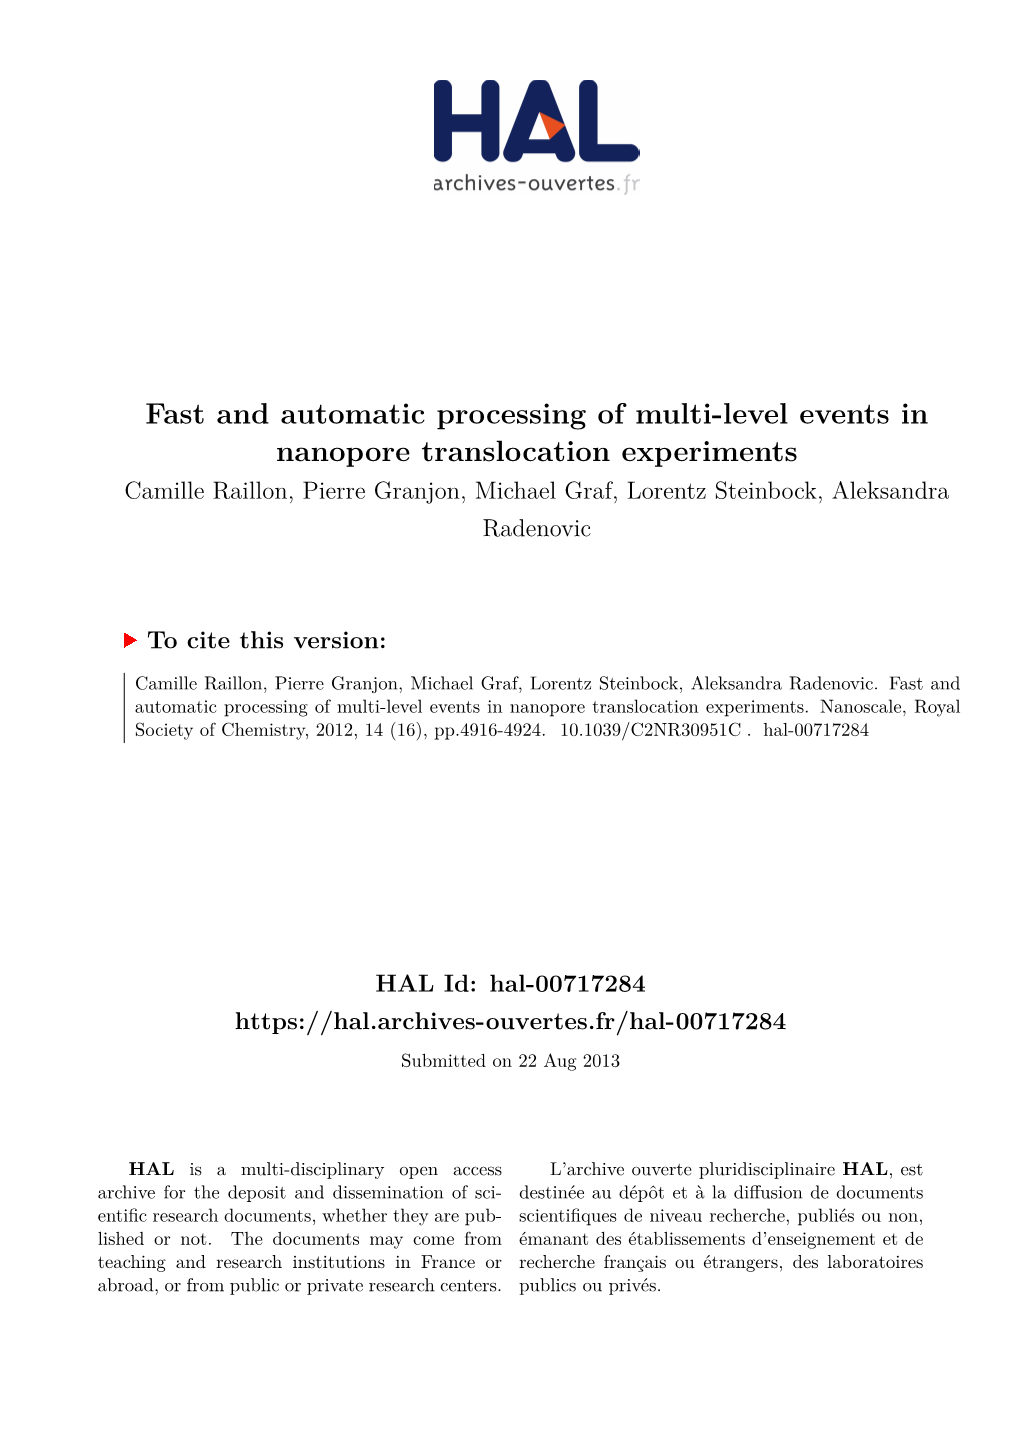 Fast and Automatic Processing of Multi-Level Events in Nanopore